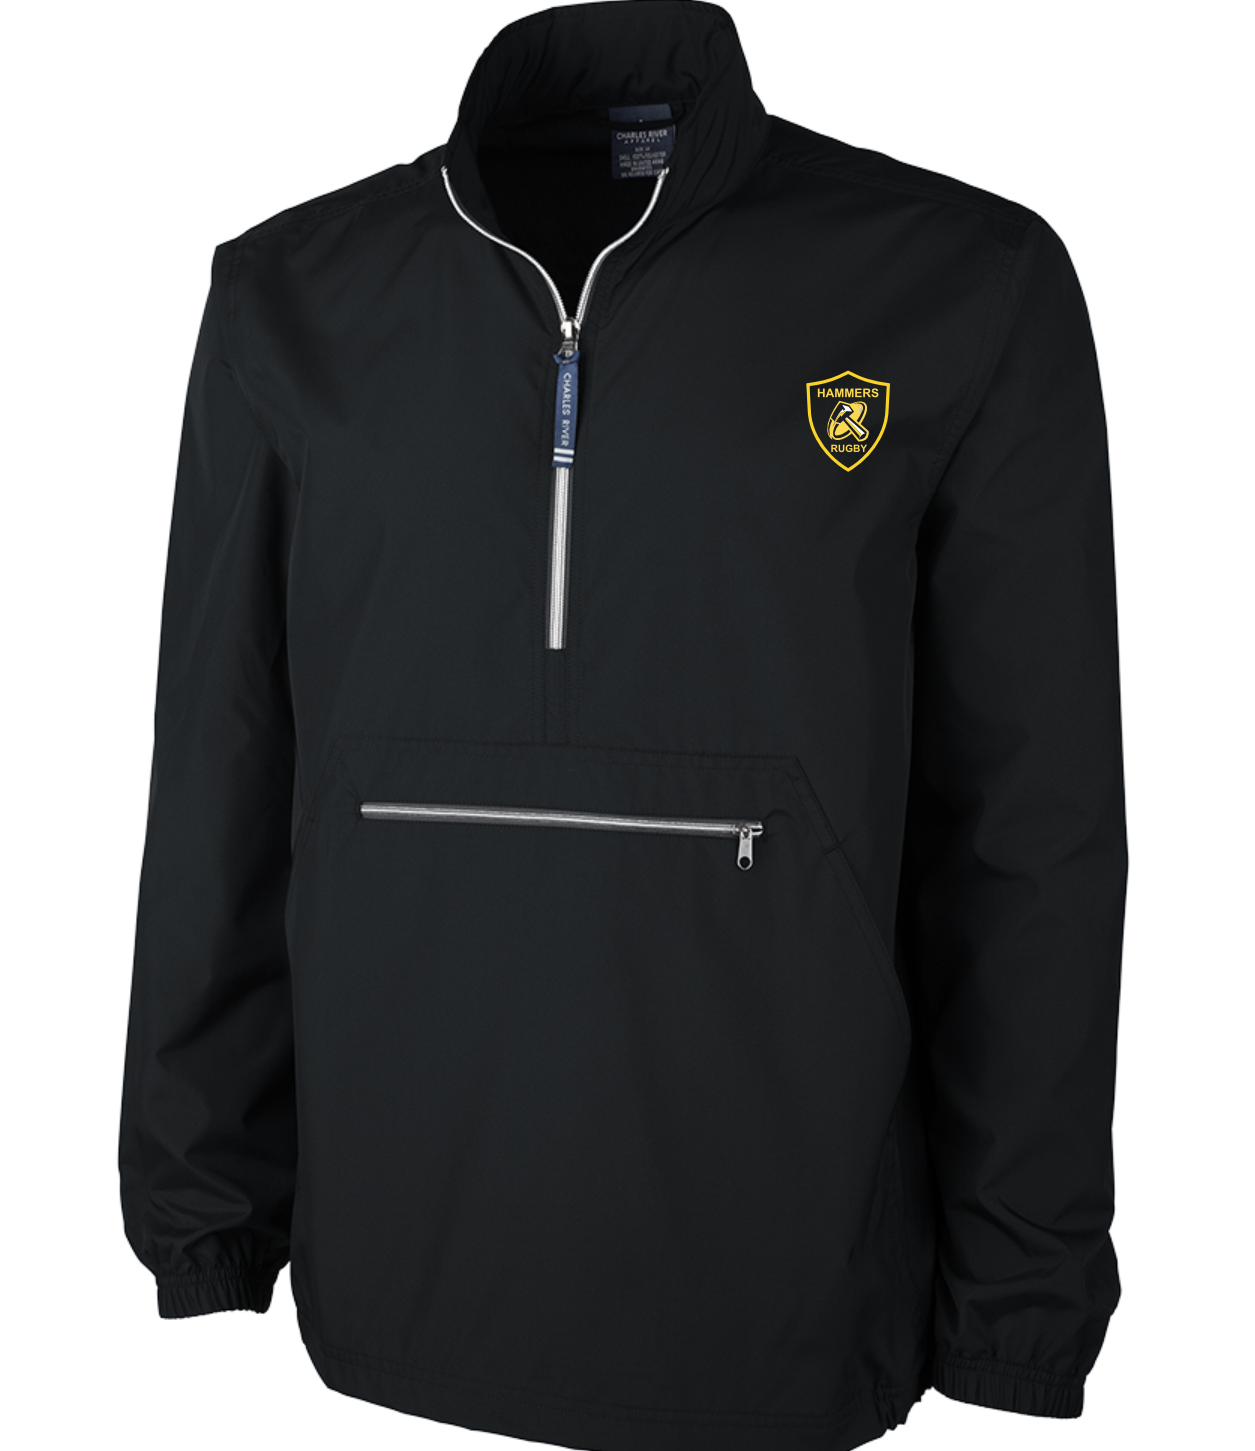 HAMMERS RUGBY WIND & RAIN PULLOVER